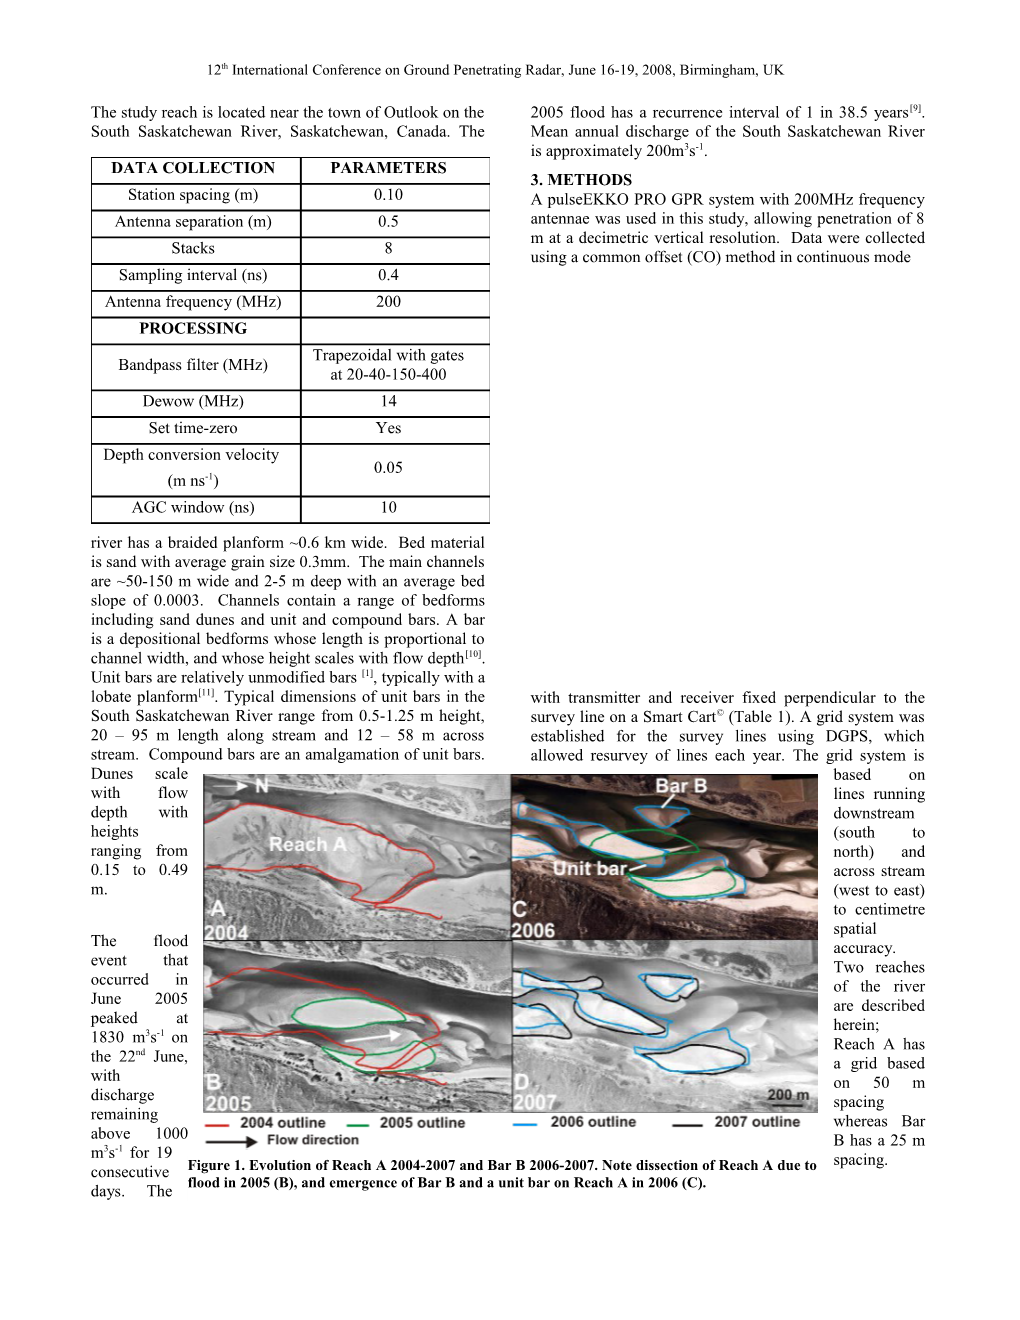 Sedimentological Impact of a High-Magnitude, Low-Frequency Flood in a Braided River Revealed